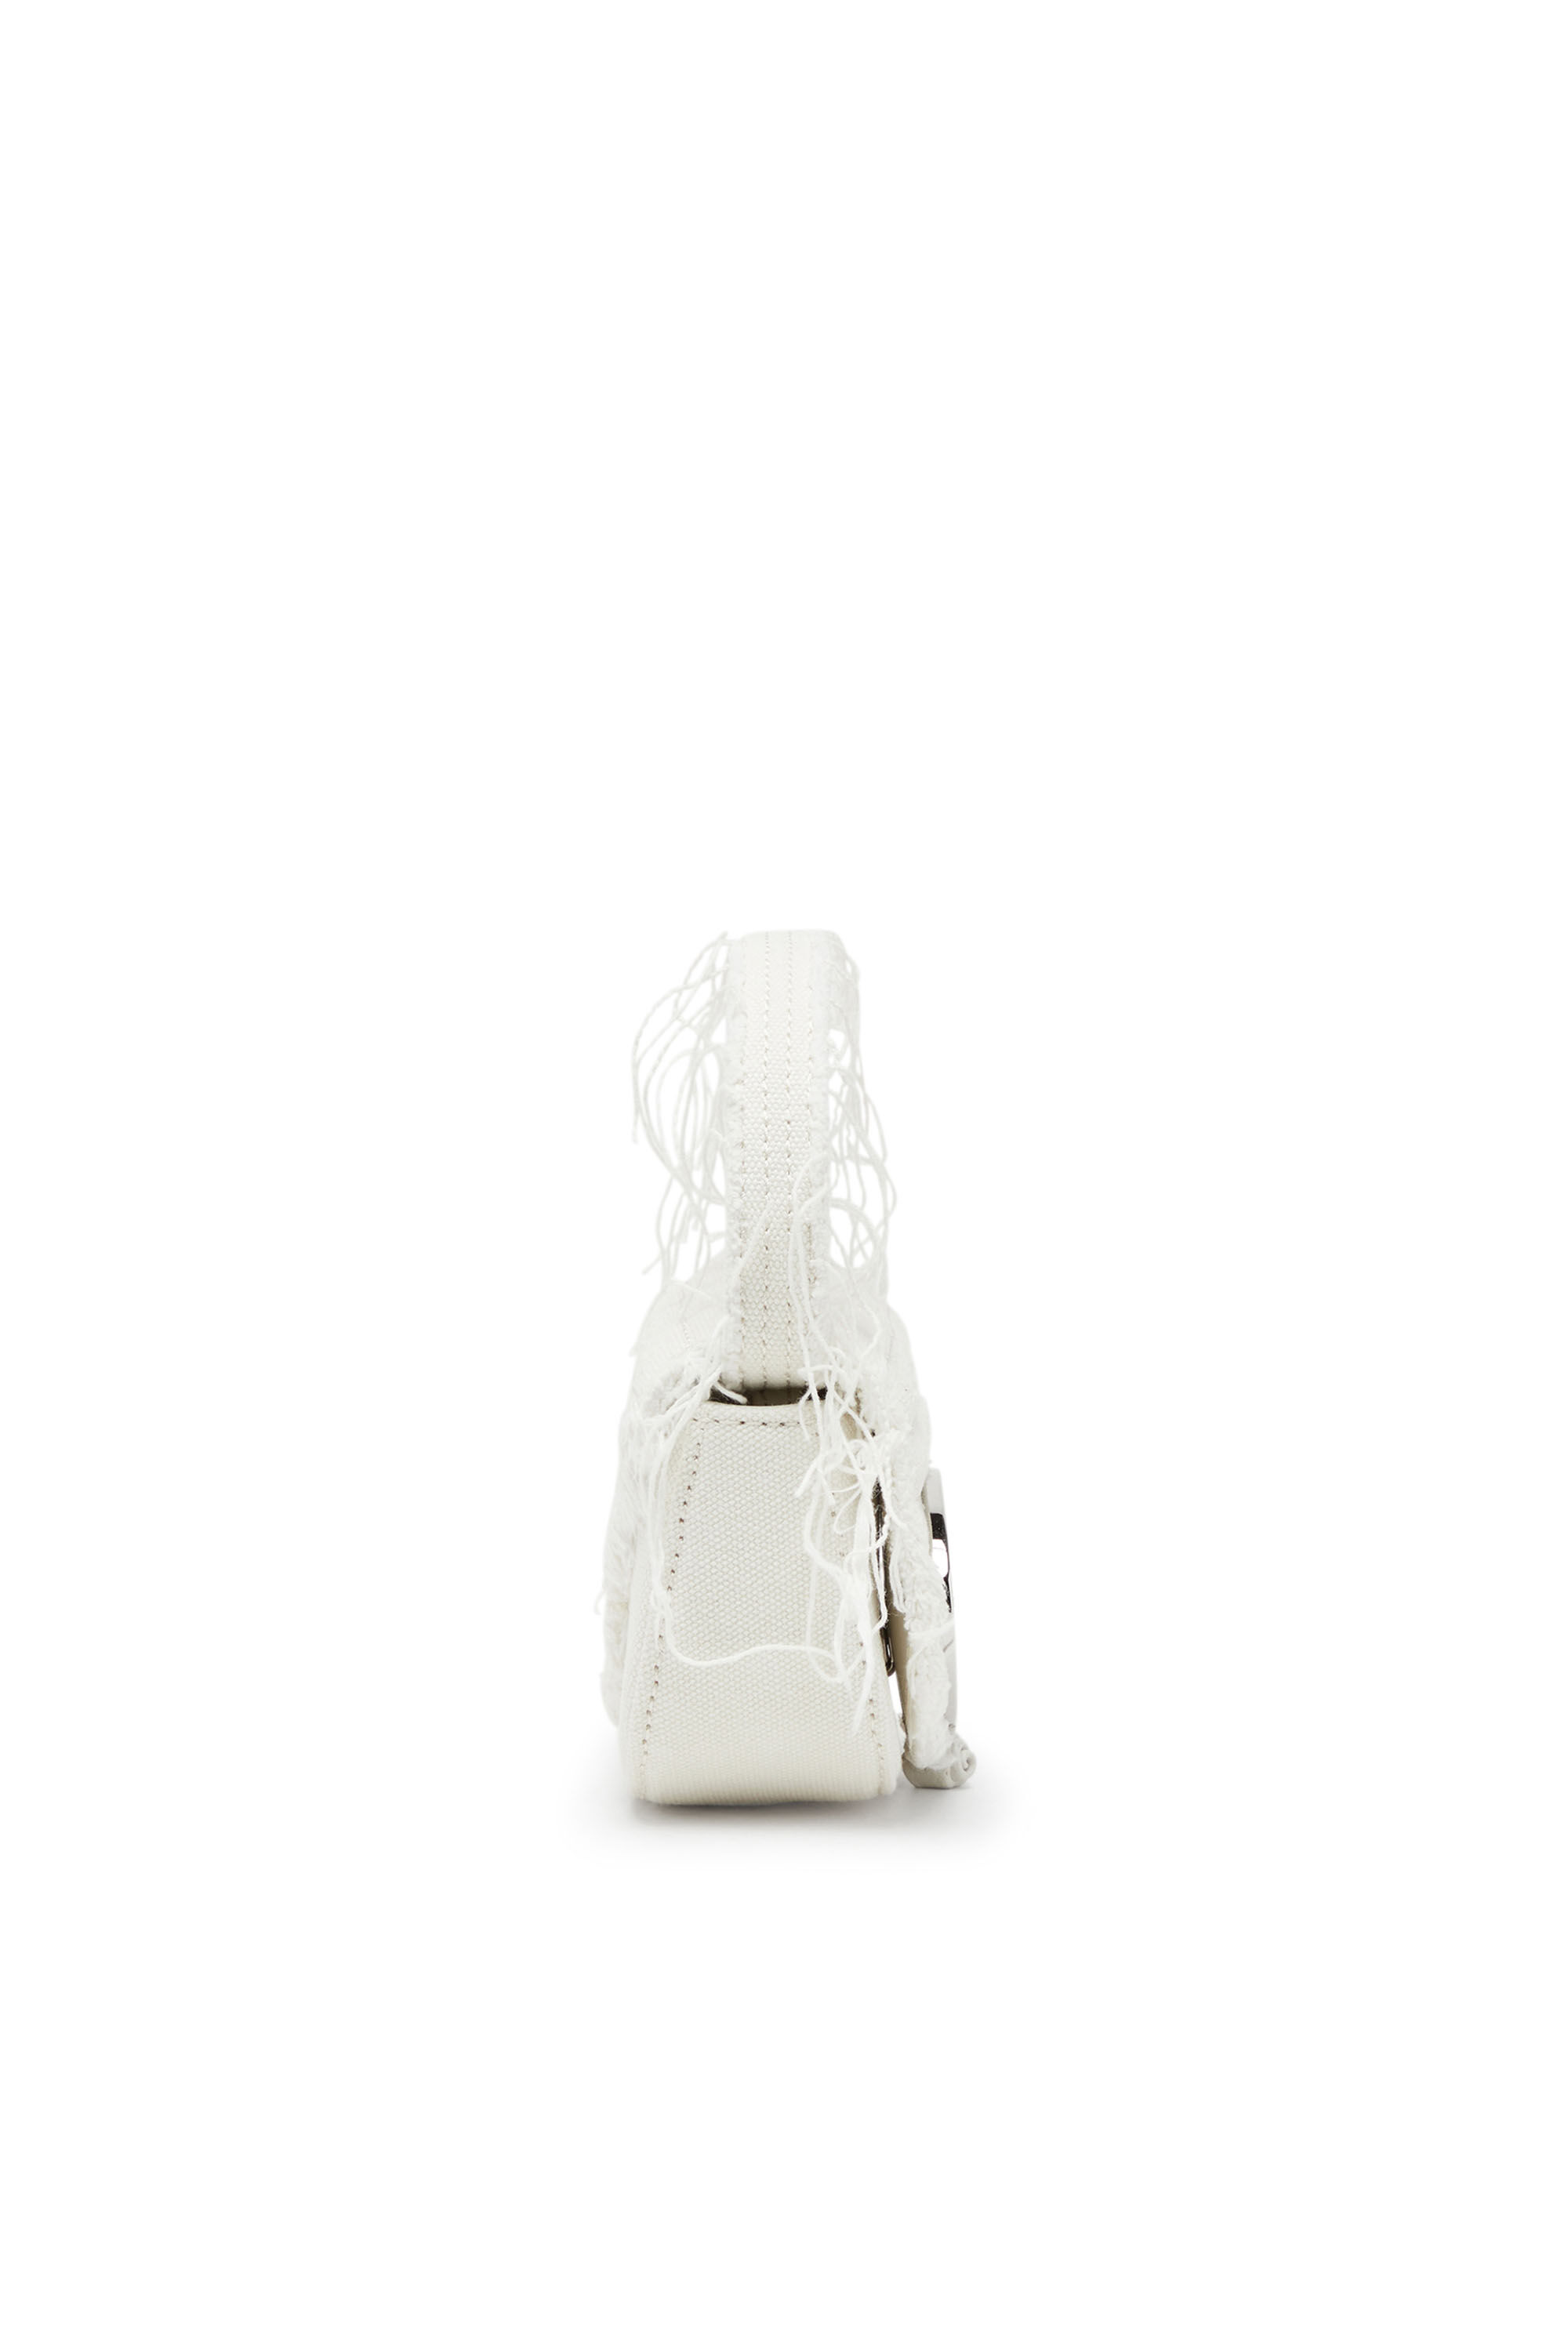 Diesel - 1DR XS, Female 1DR XS-Iconic mini bag in canvas and leather in ホワイト - Image 4